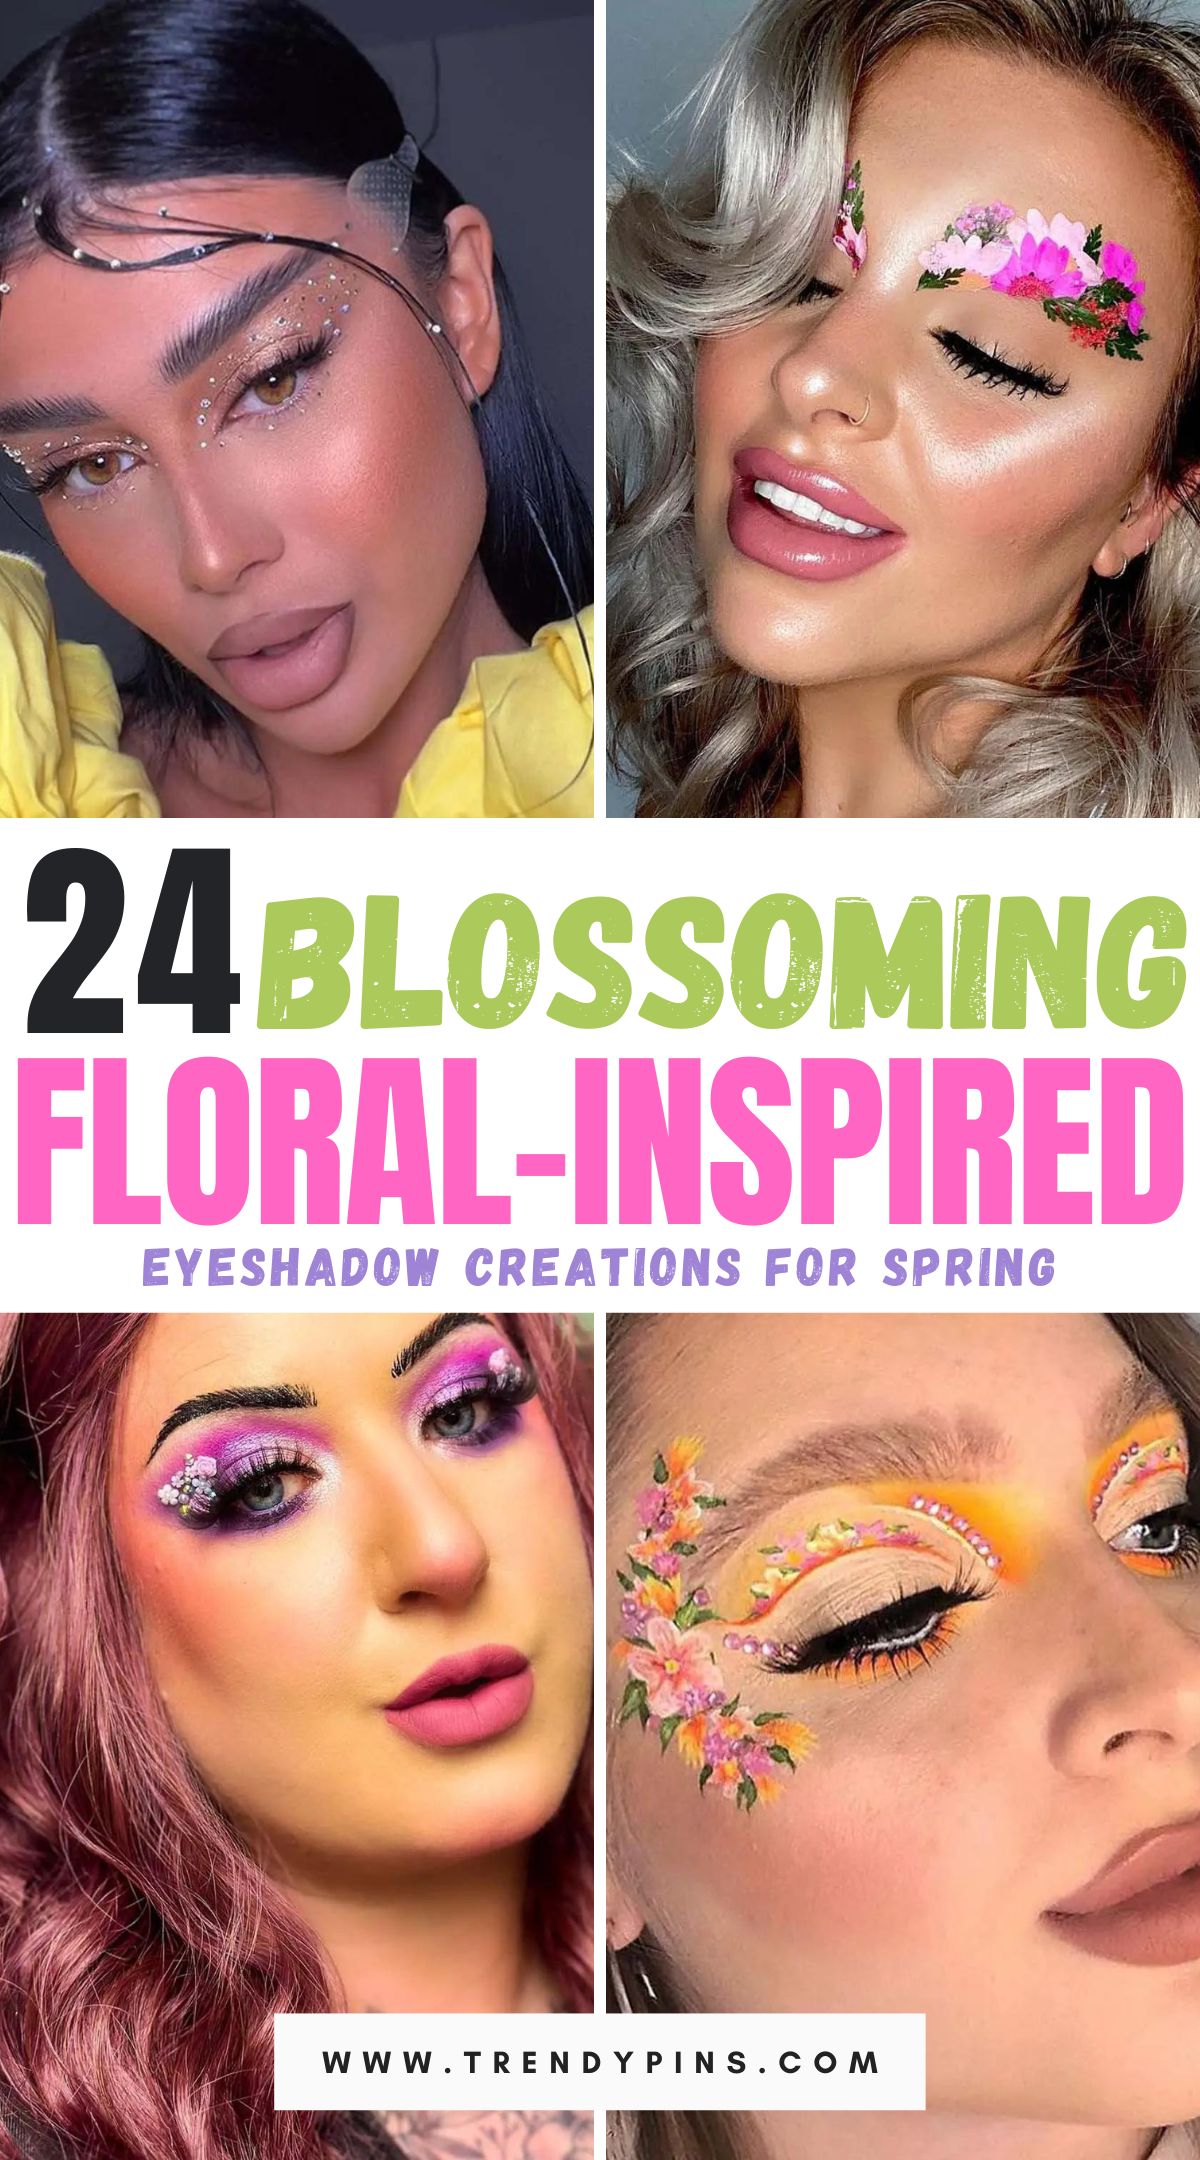 Embrace the natural spring vibe with these 24 floral-inspired eyeshadow looks. Explore creative makeup ideas that capture the beauty of flowers and add a fresh and vibrant touch to your style.